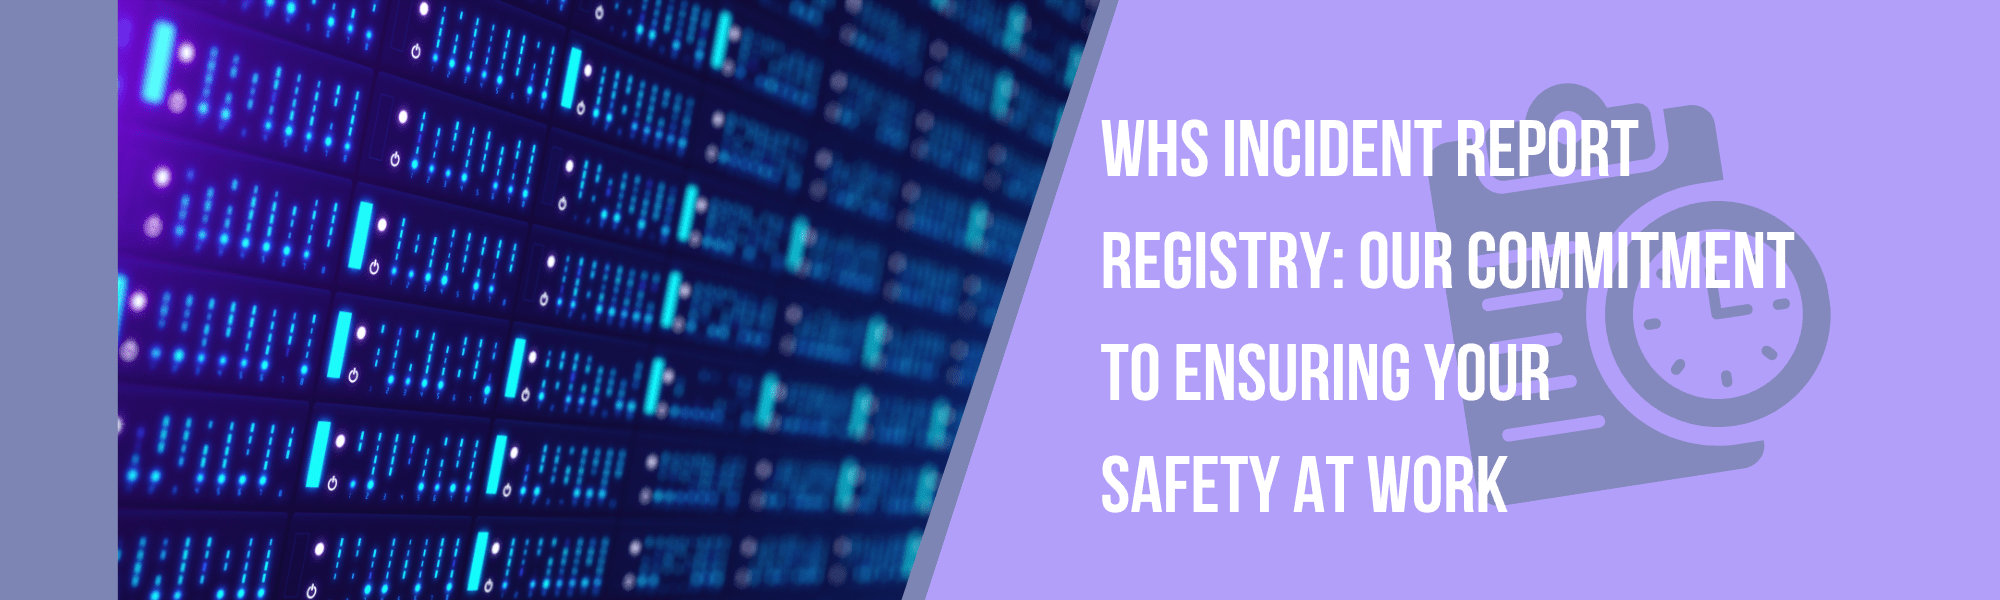 Motherboard control dashboard for WHS Incident report register for safety at work